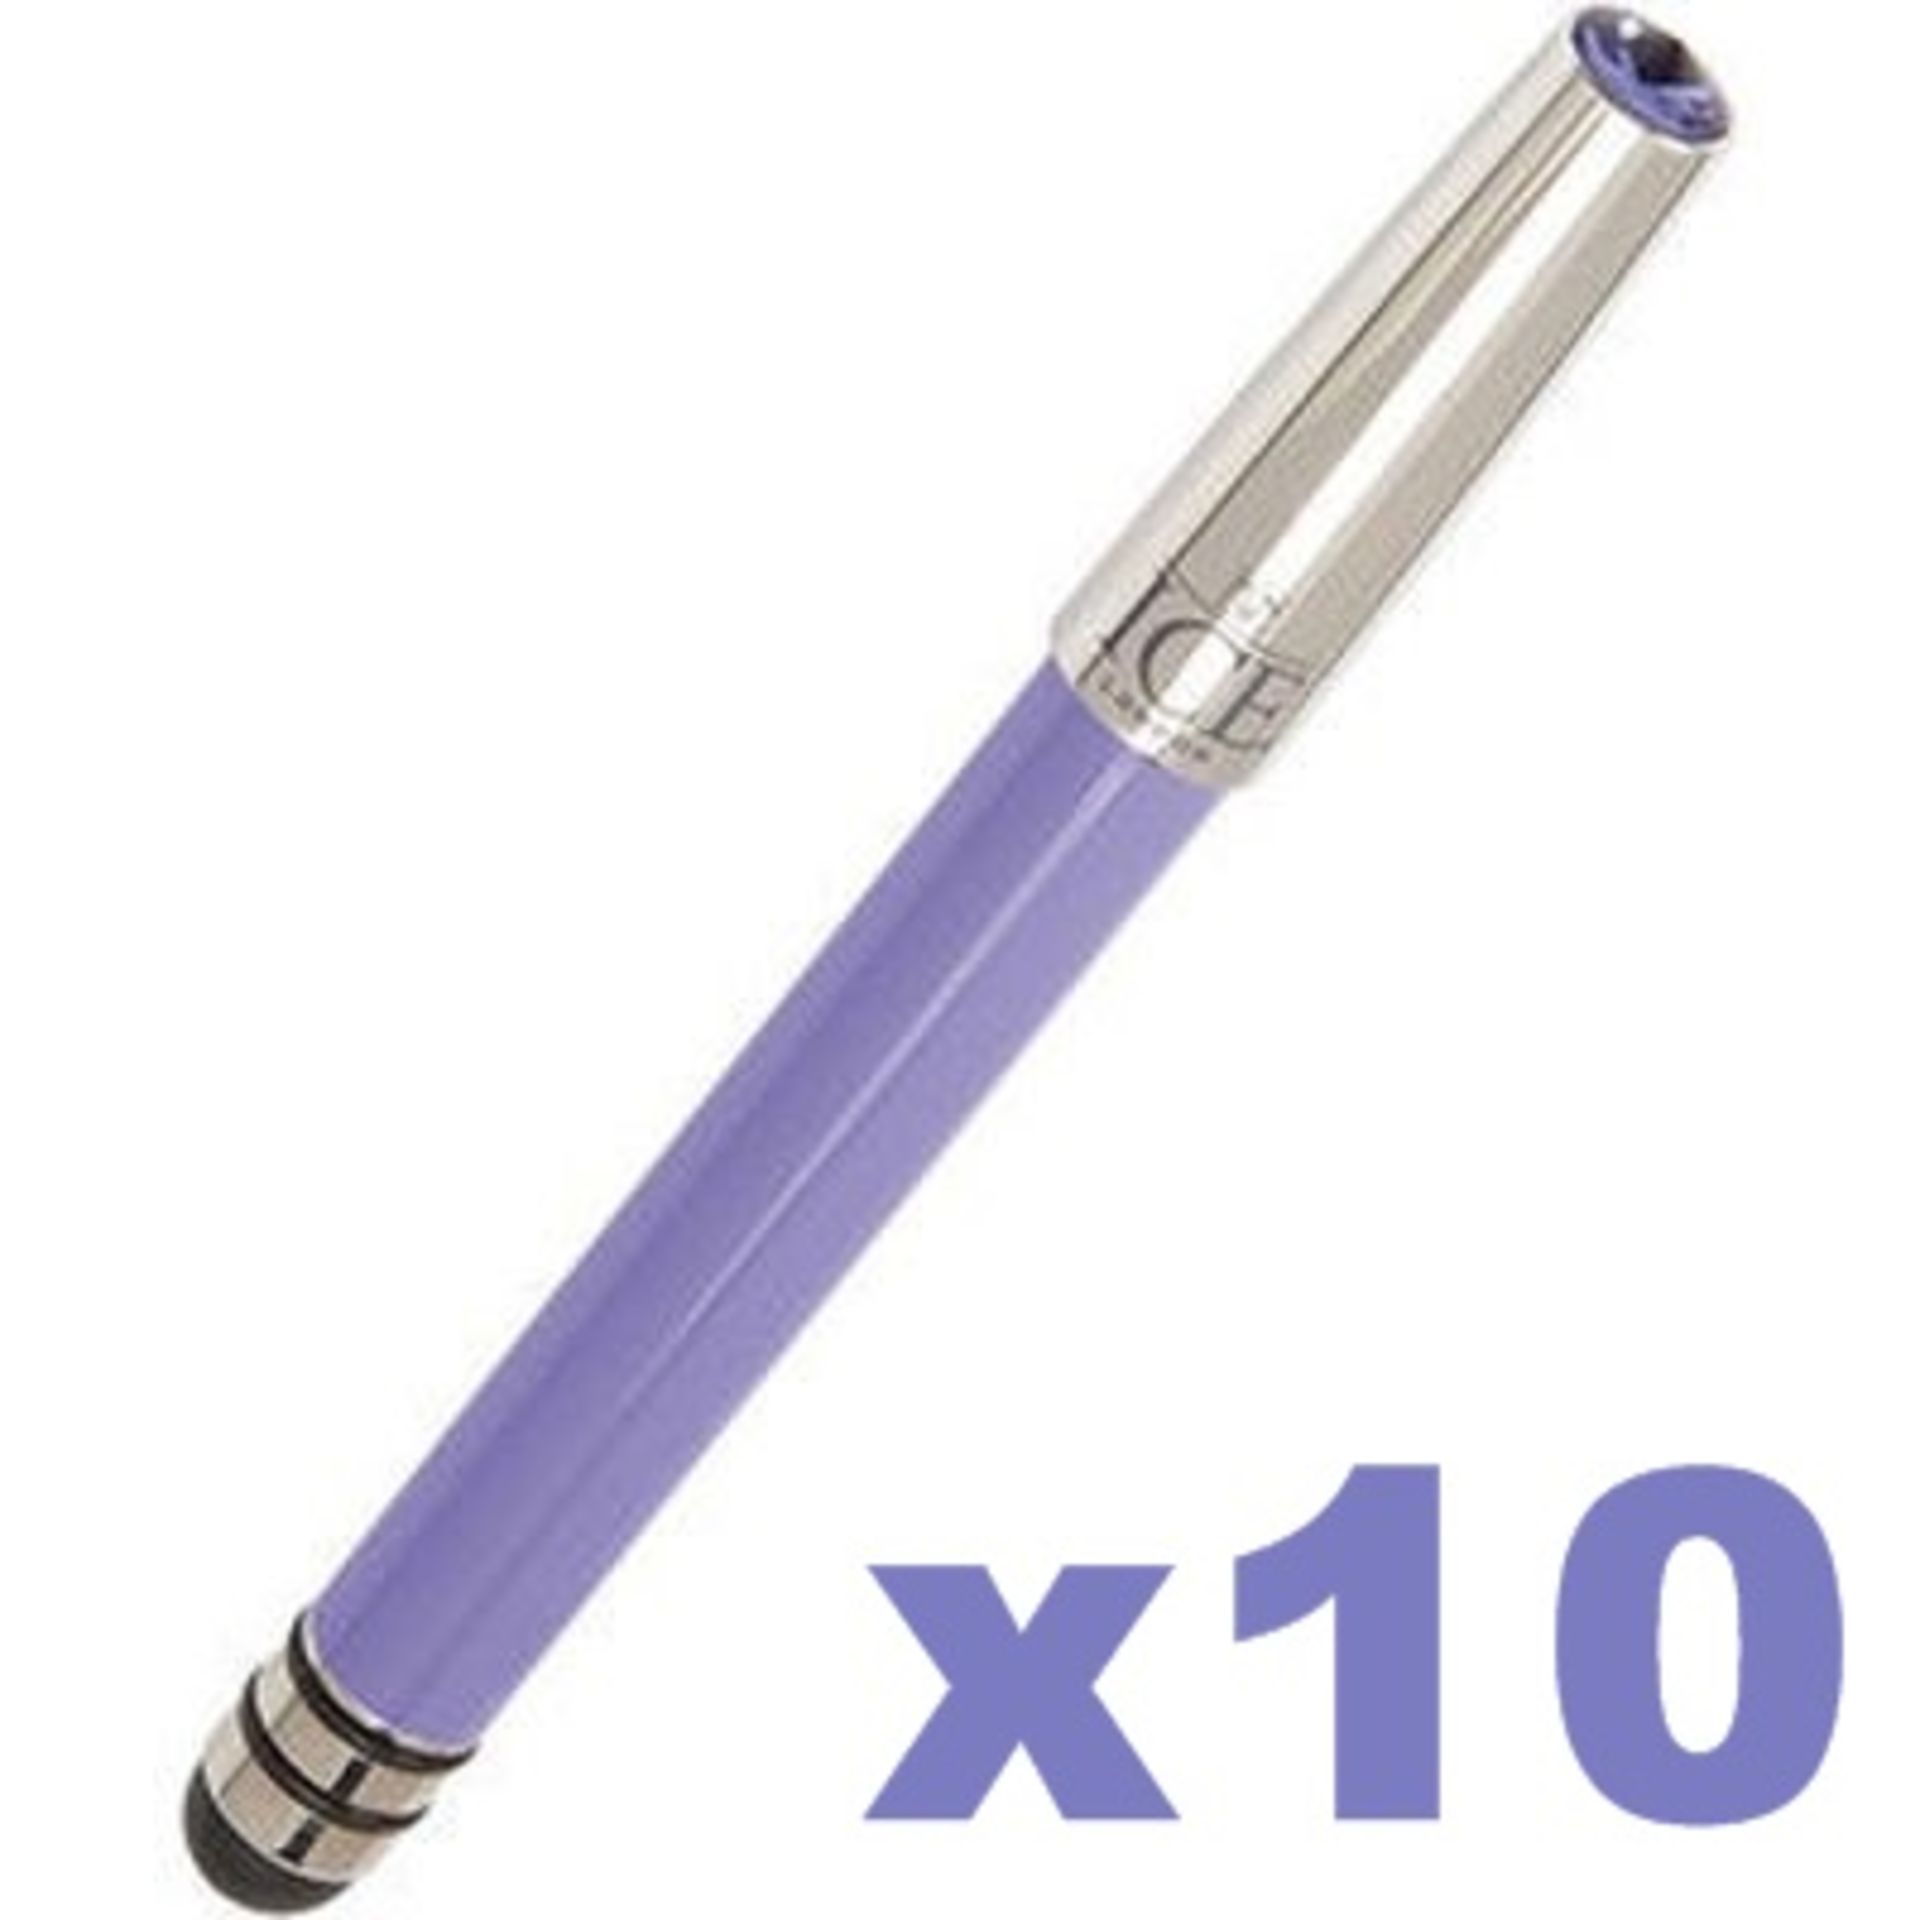 10 x ICE LONDON App Pen Duo - Touch Stylus And Ink Pen Combined - Colour: PURPLE - MADE WITH - Image 4 of 5